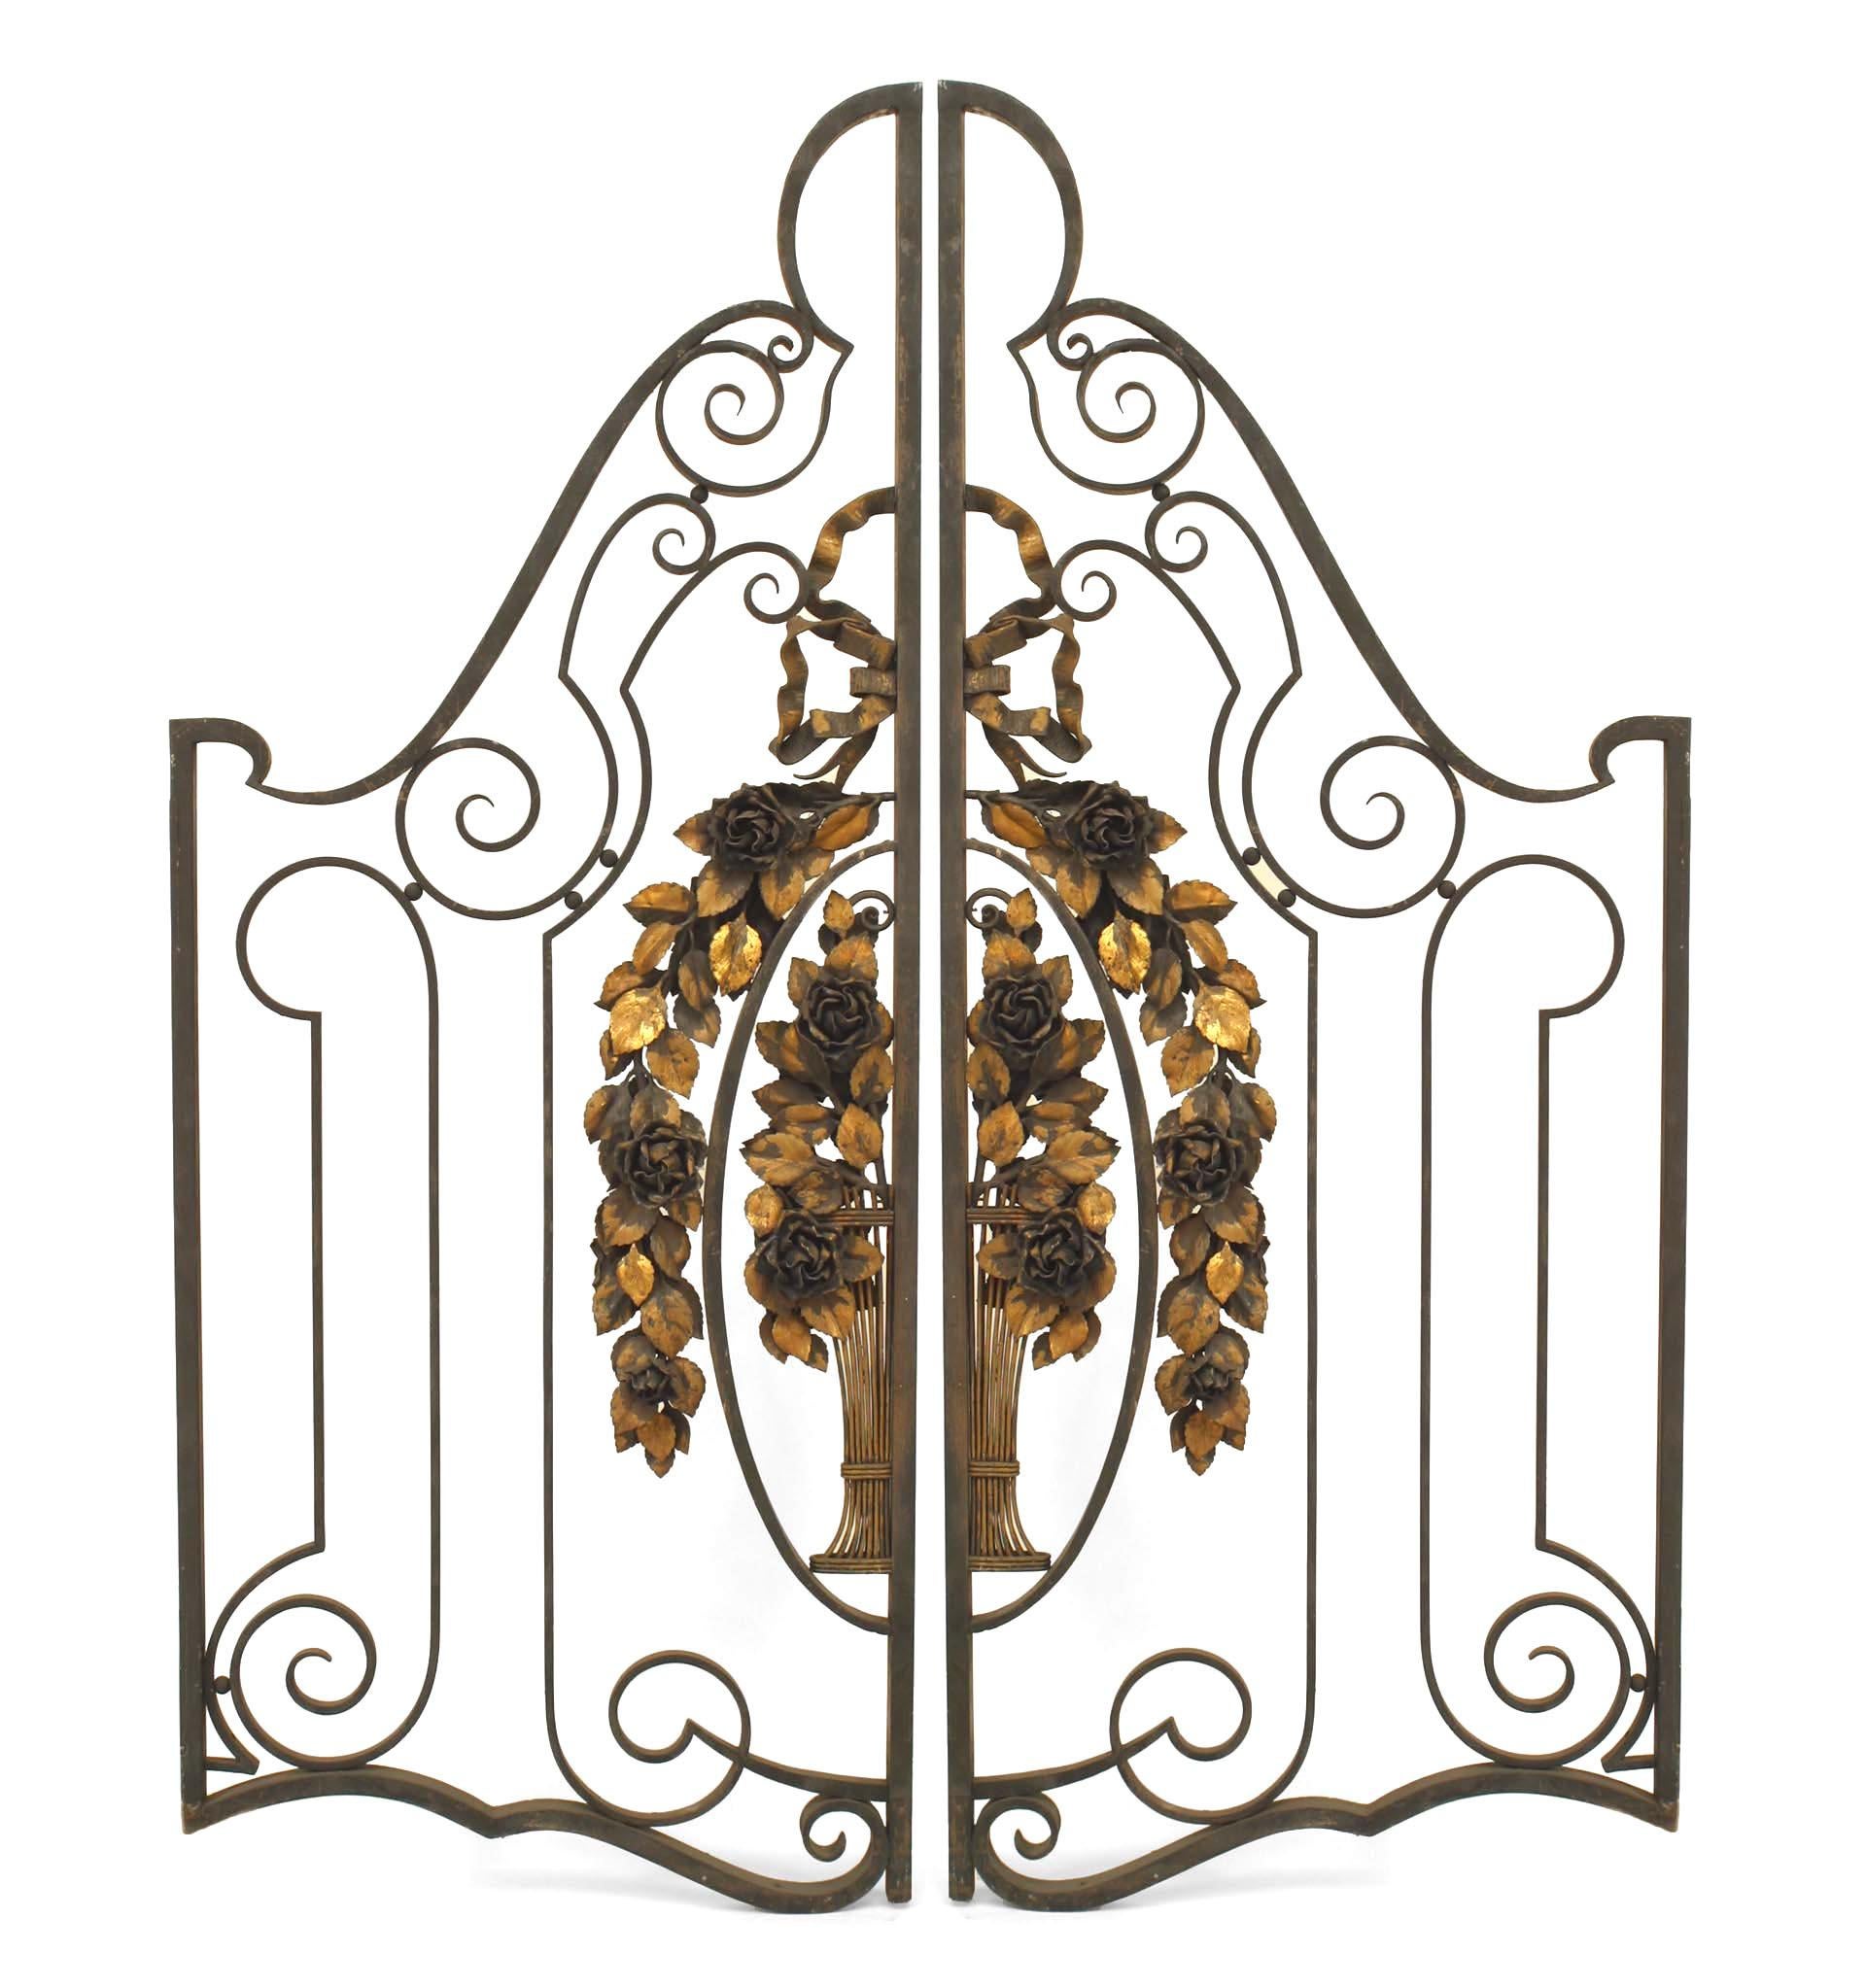 Pair of French Art Deco Gilt Trimmed Gates